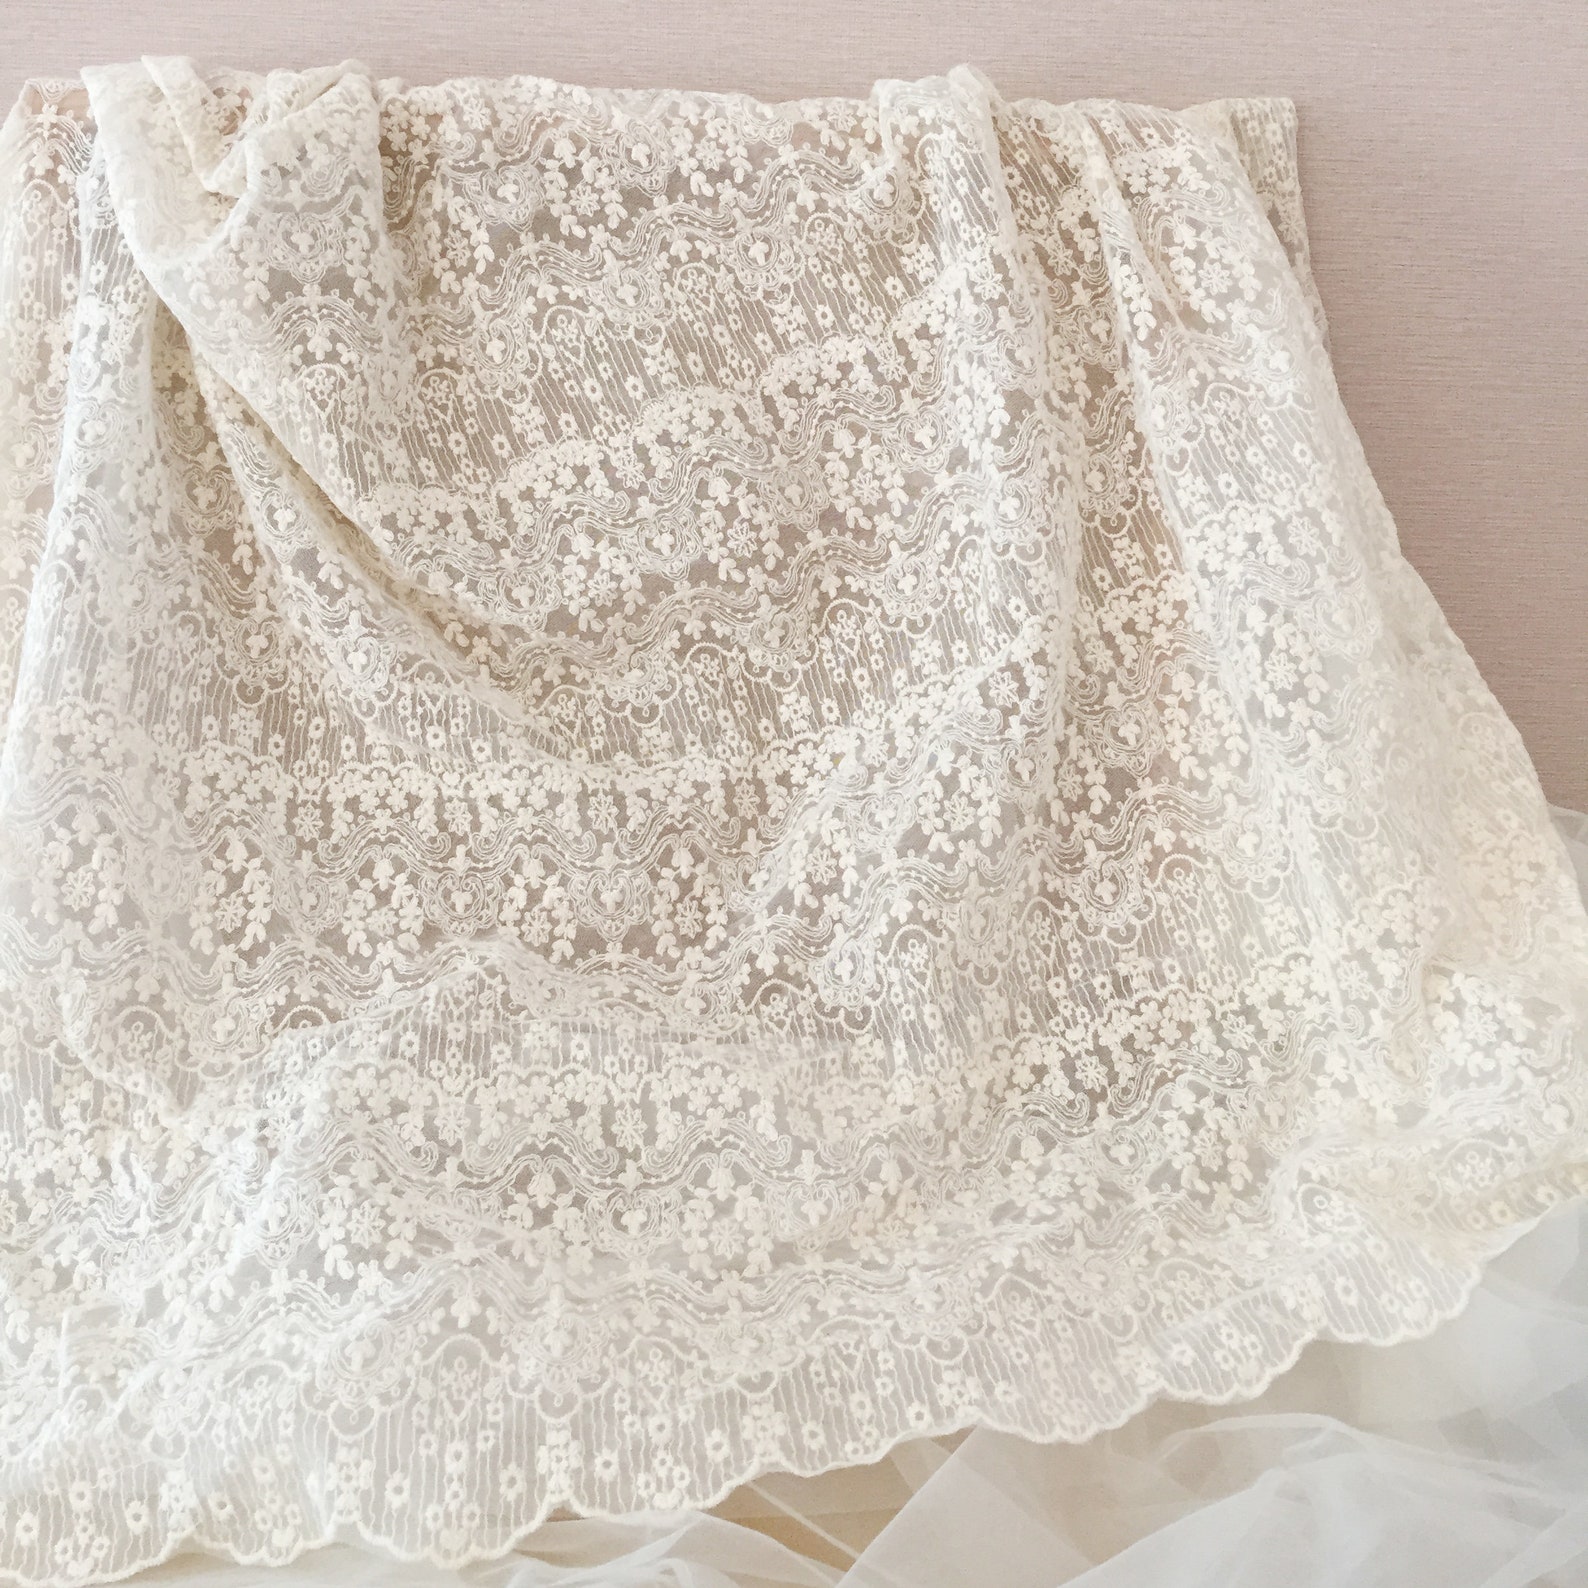 Vintage Style Double Scallop Cotton Lace Fabric in Beige - Etsy